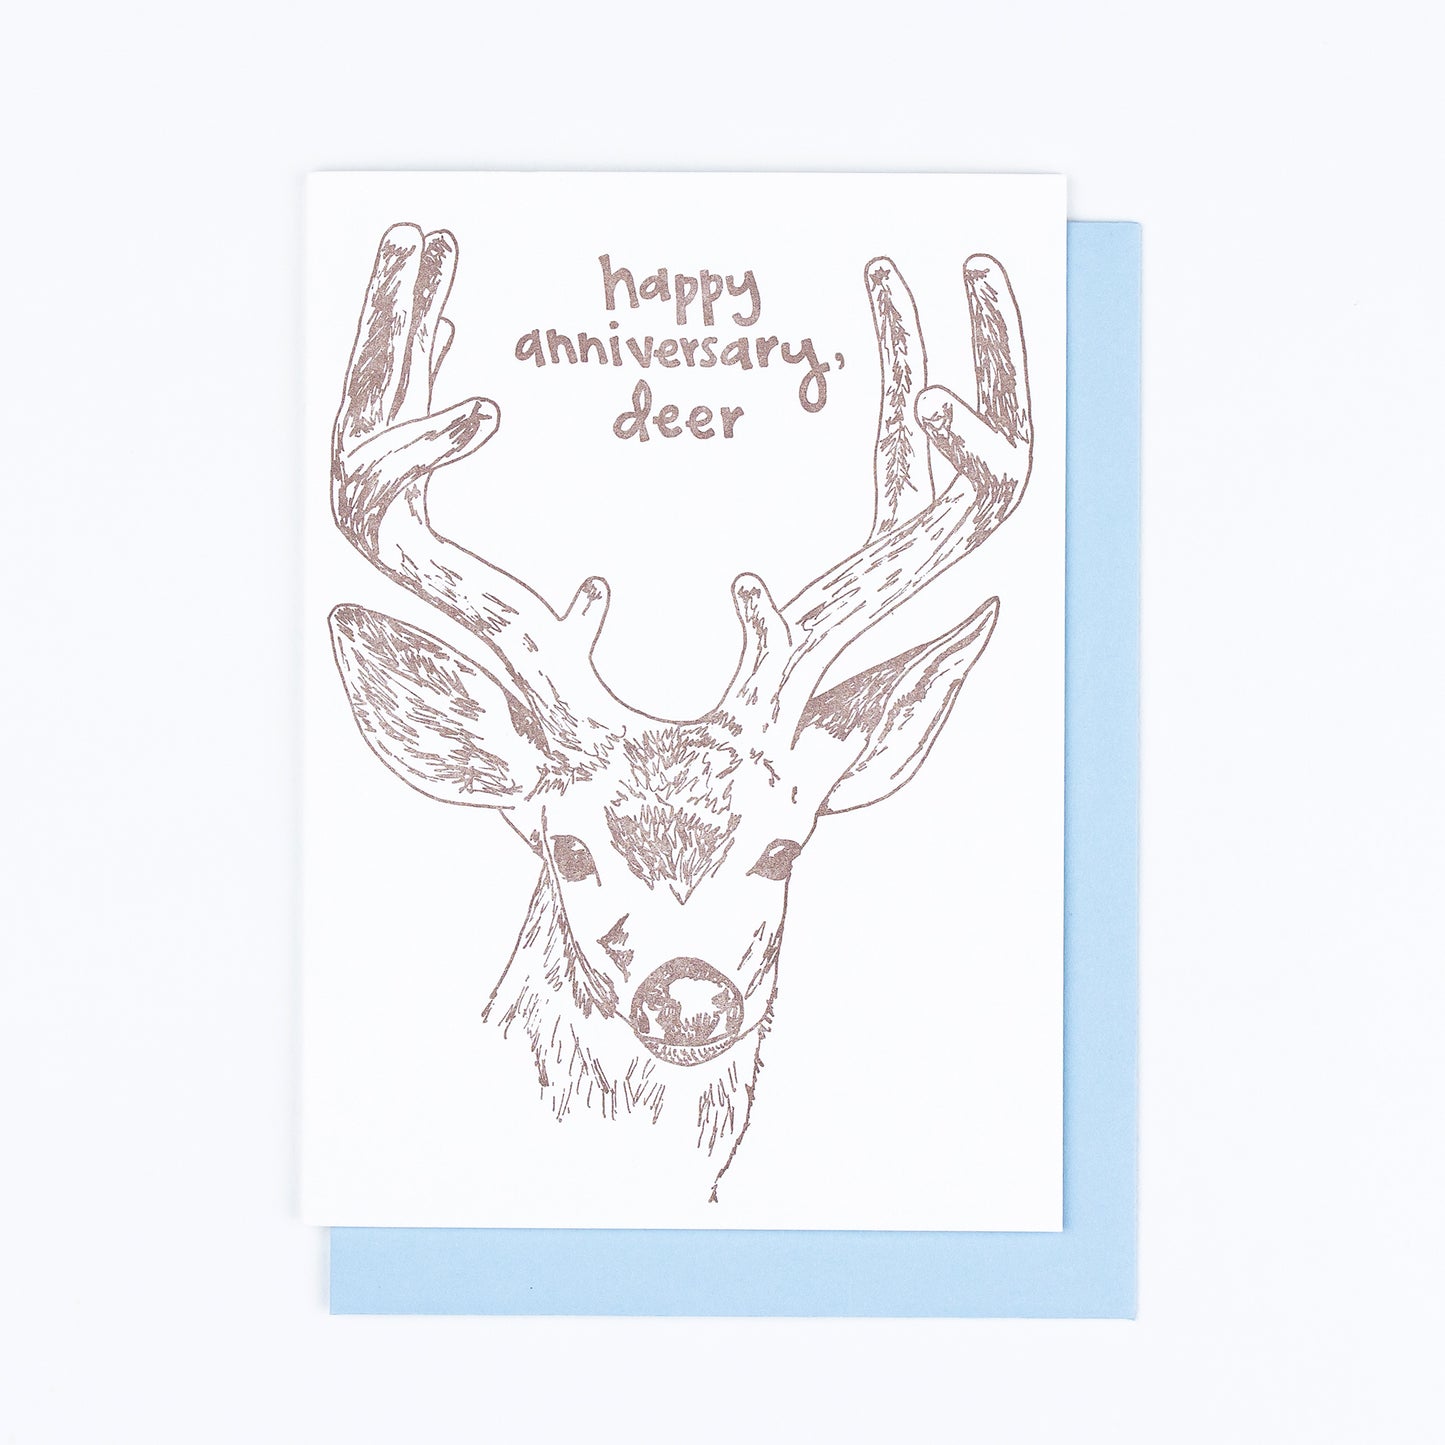 Letterpress greeting card featuring a hand-drawn buck, printed in an earthy brown ink. Whimsical hand-drawn text saying "Happy Annivesary, Deer" is shown inside the deer antlers, in the same brown ink. The card is white, blank inside, and is paired with a light blue envelope.